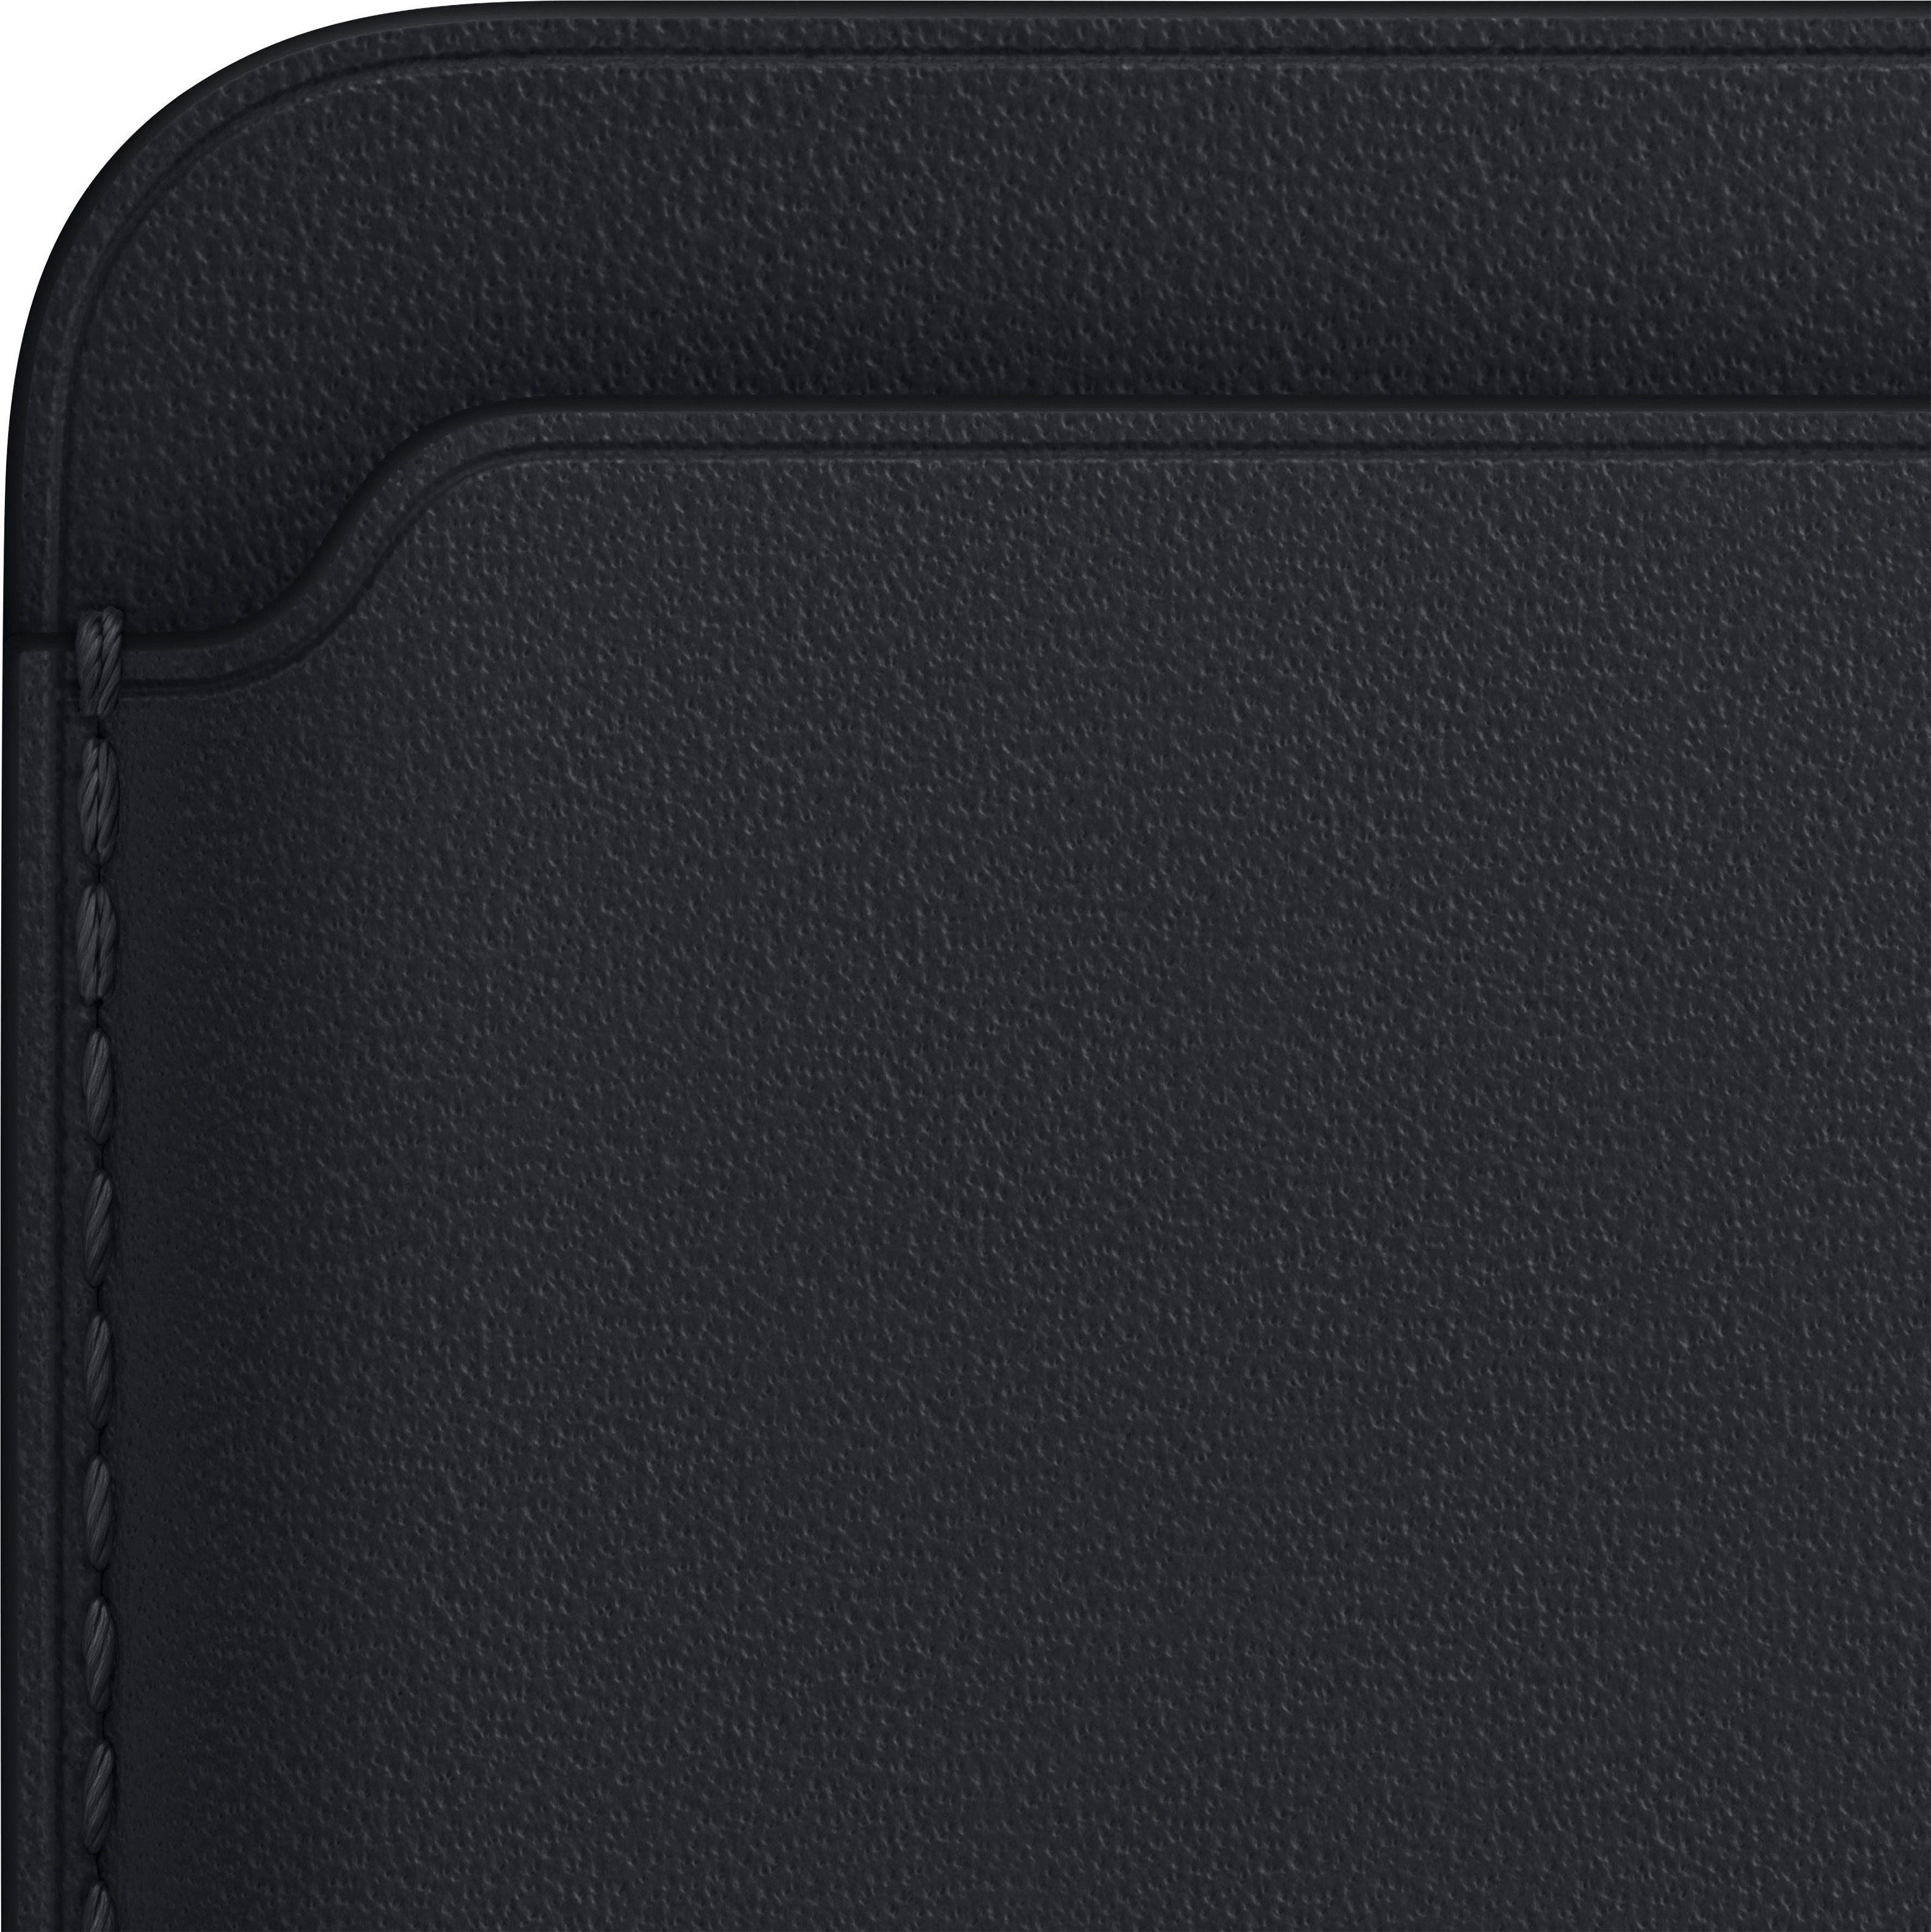 Best Buy: Apple iPhone Leather Wallet with MagSafe Midnight MM0Y3ZM/A